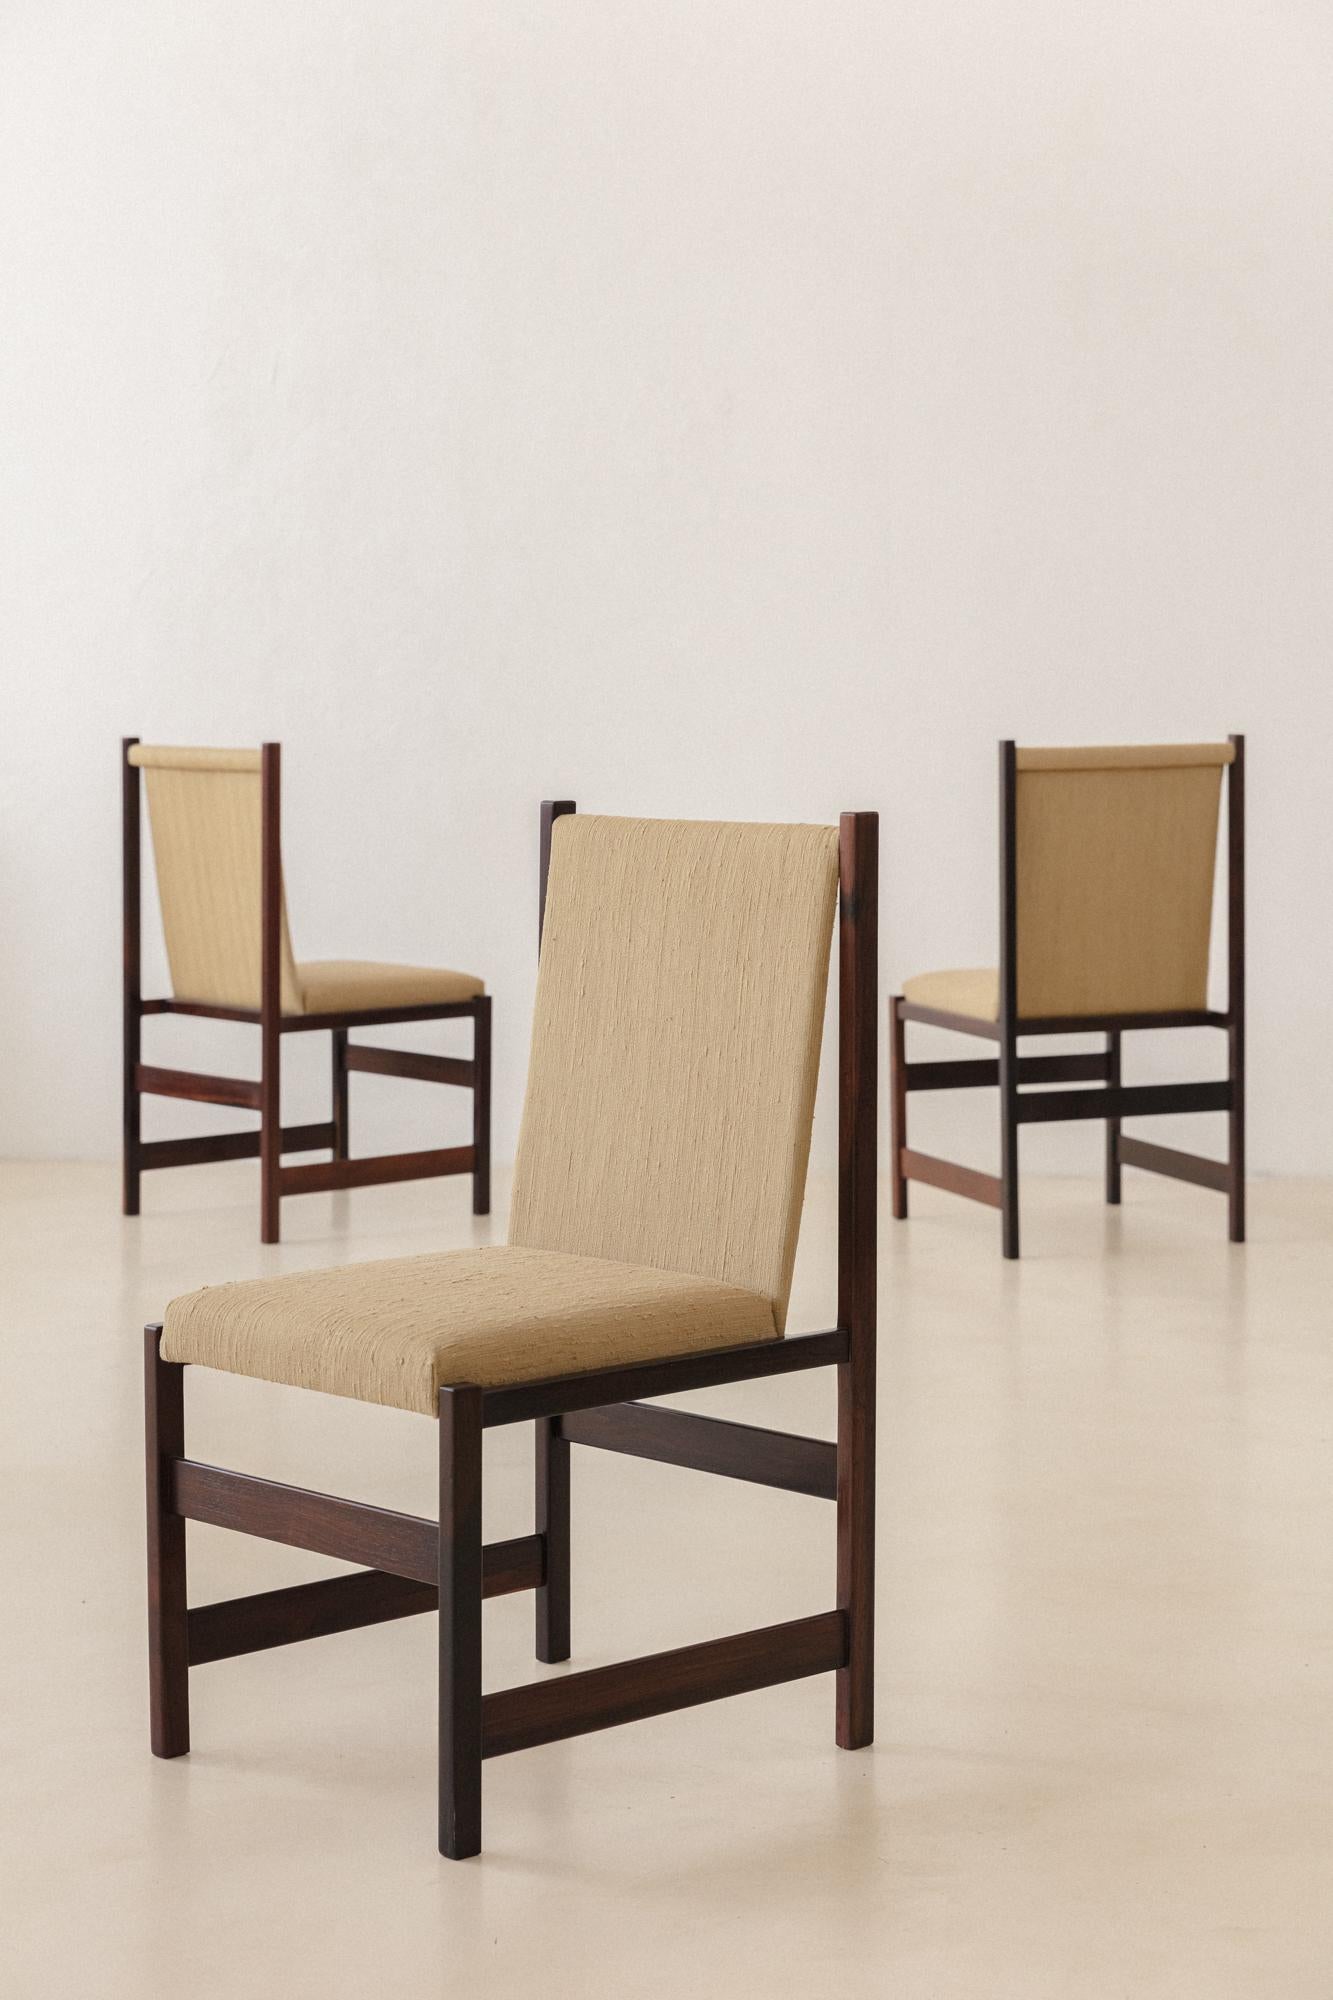 Set of 10 Rosewood Dining Chairs, Celina Decorações, Brazilian Midcentury, 1960s For Sale 10